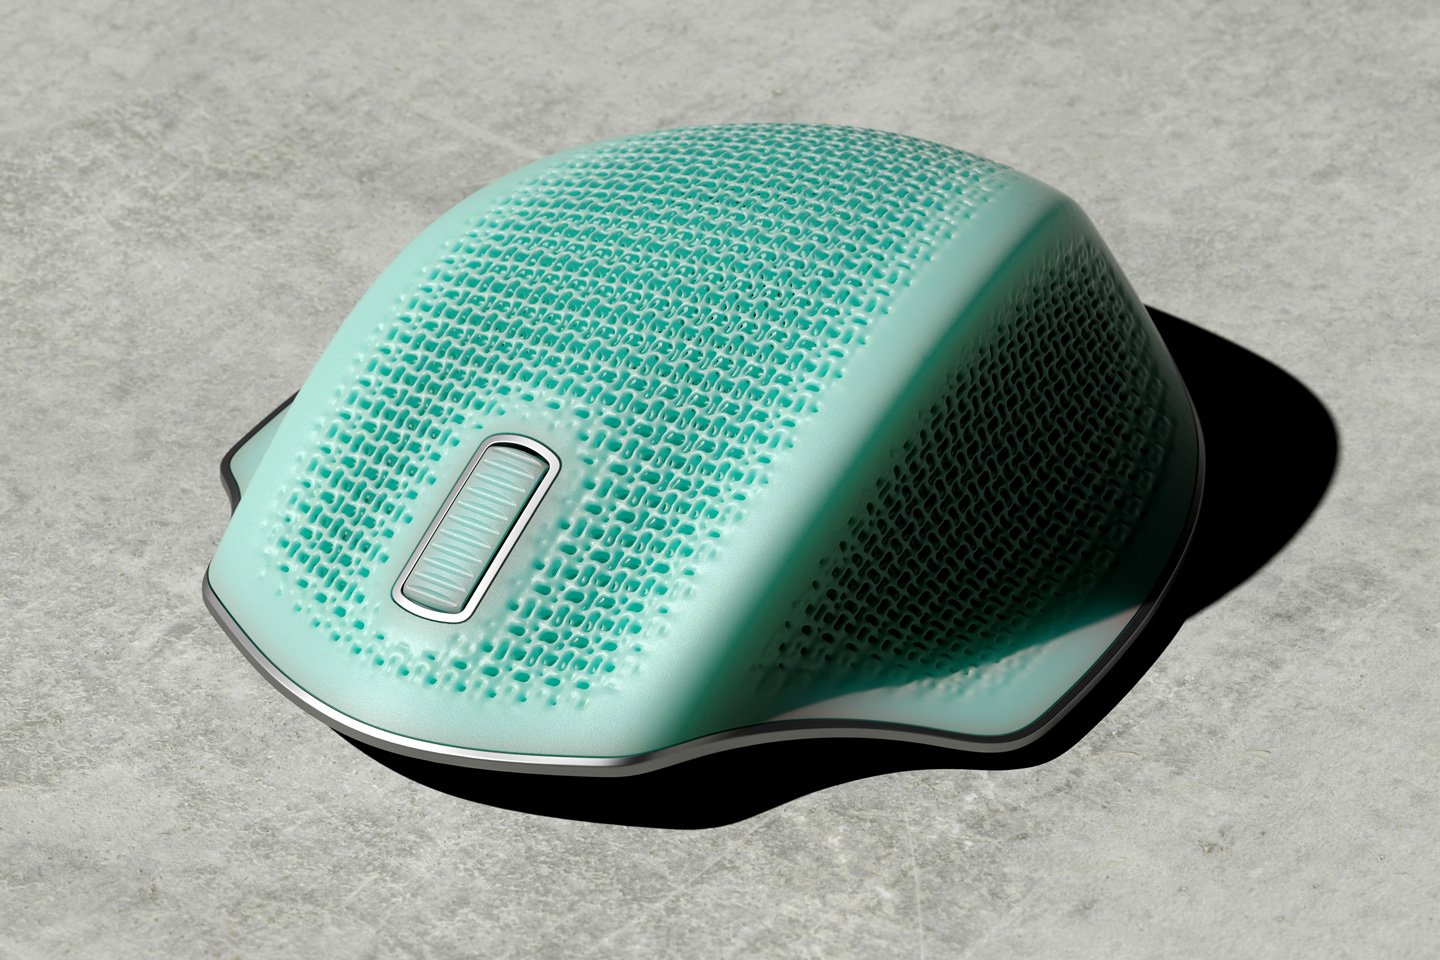 Inspired by Adidas, this wireless mouse is redefining ergonomics with its soft 3D printed mesh design